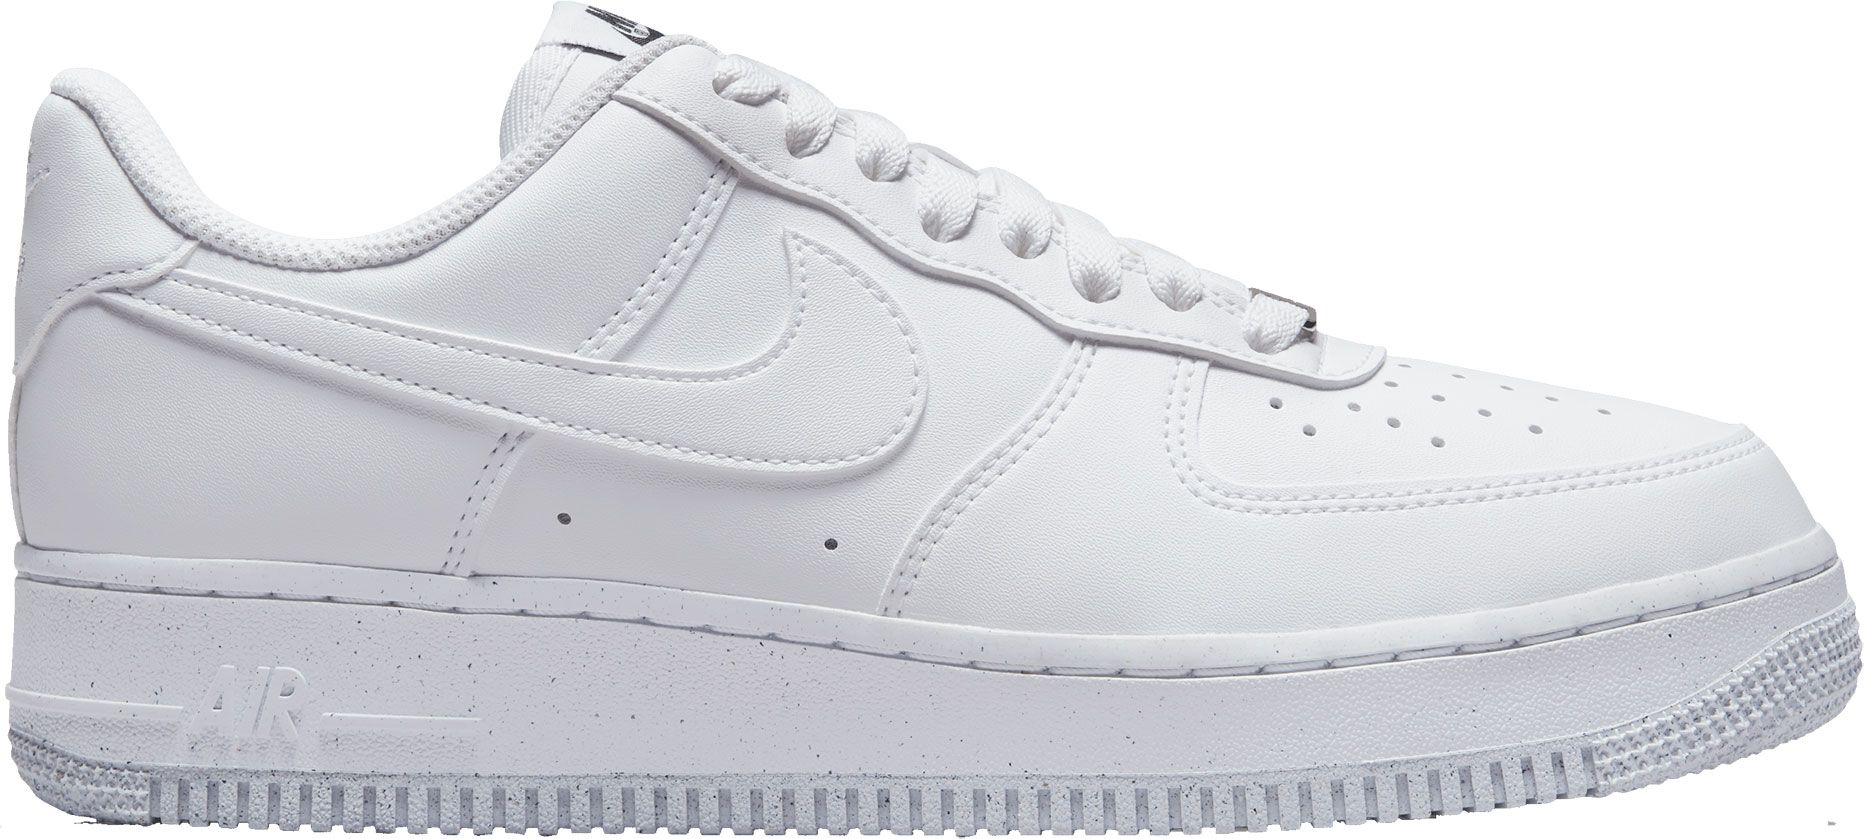 white air force ones near me mens